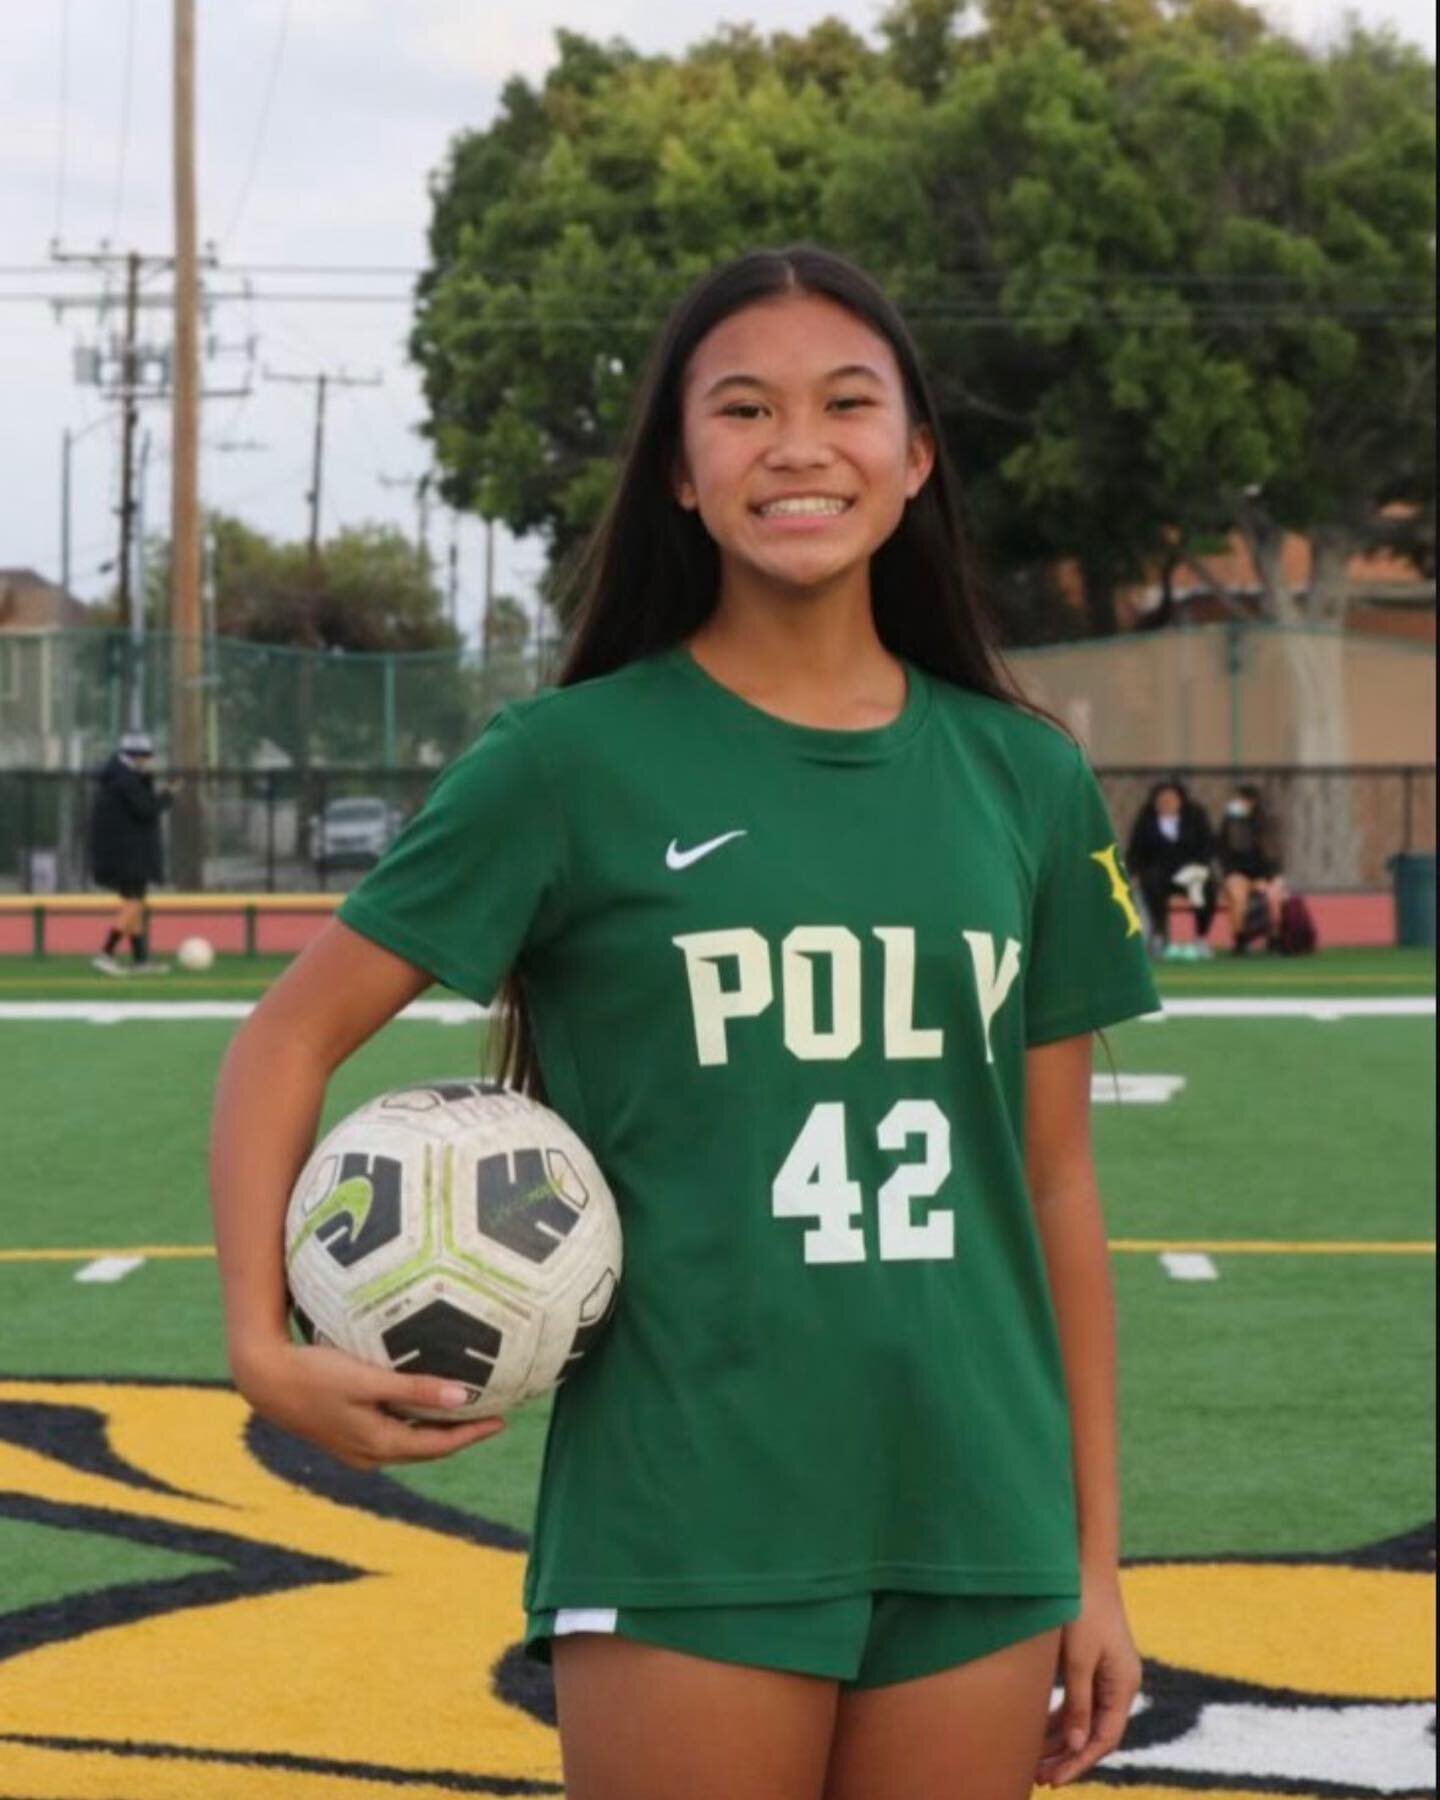 Alex Valente, class of 2025, is the starting center back on the Poly Girls Varisty Soccer team. Like many PACE students, she&rsquo;s a scholar athlete and as part of our Grammy winning Choir program she rounds it all out as a musician. #polypace #sch